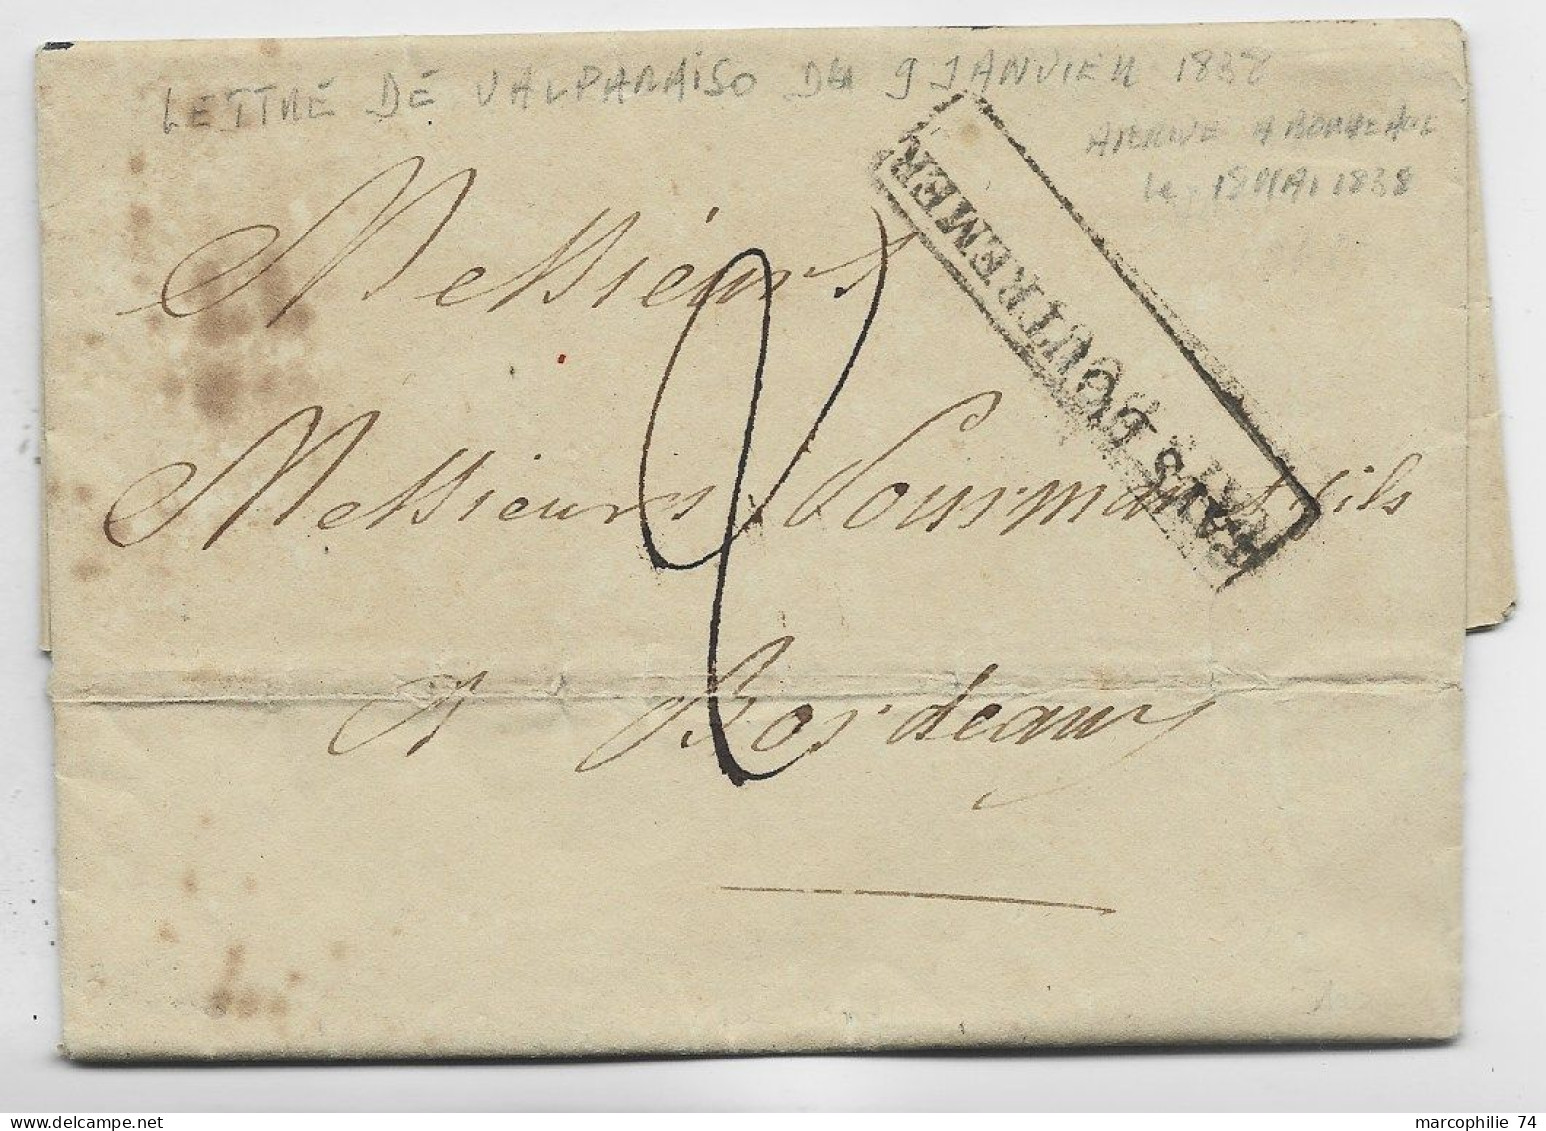 CHILE CHILI LETTRE COVER VALPARAISO 1838 LETTRE COVER  BORDEAUX FRANCE + PAYS D'OUTREMER - Correo Marítimo